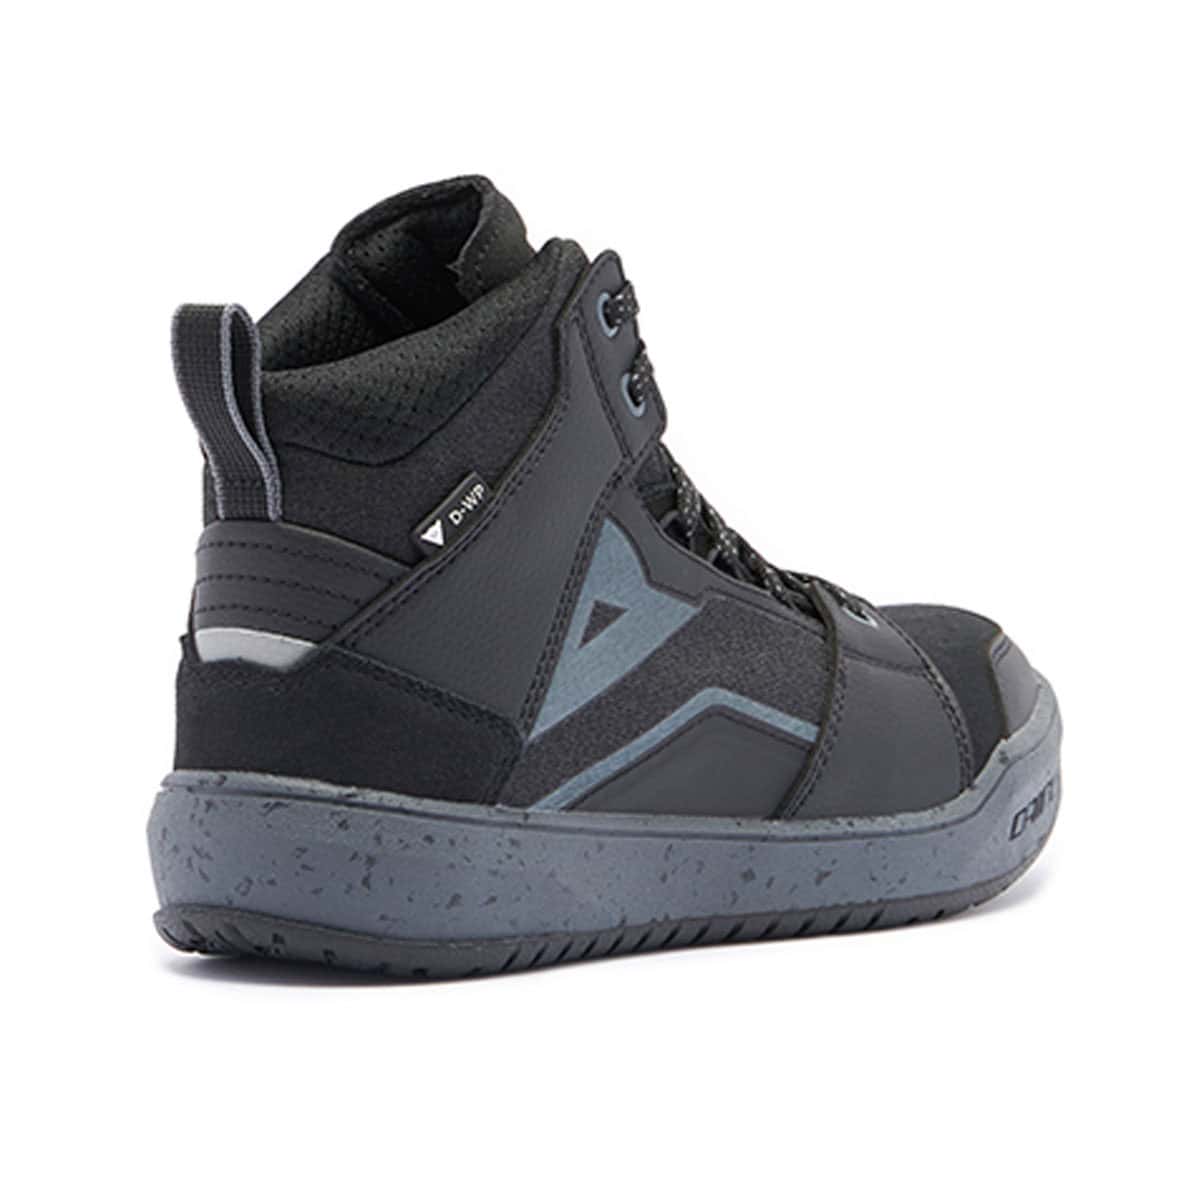 Ladies Dainese Suburb D-WP boots - Rear